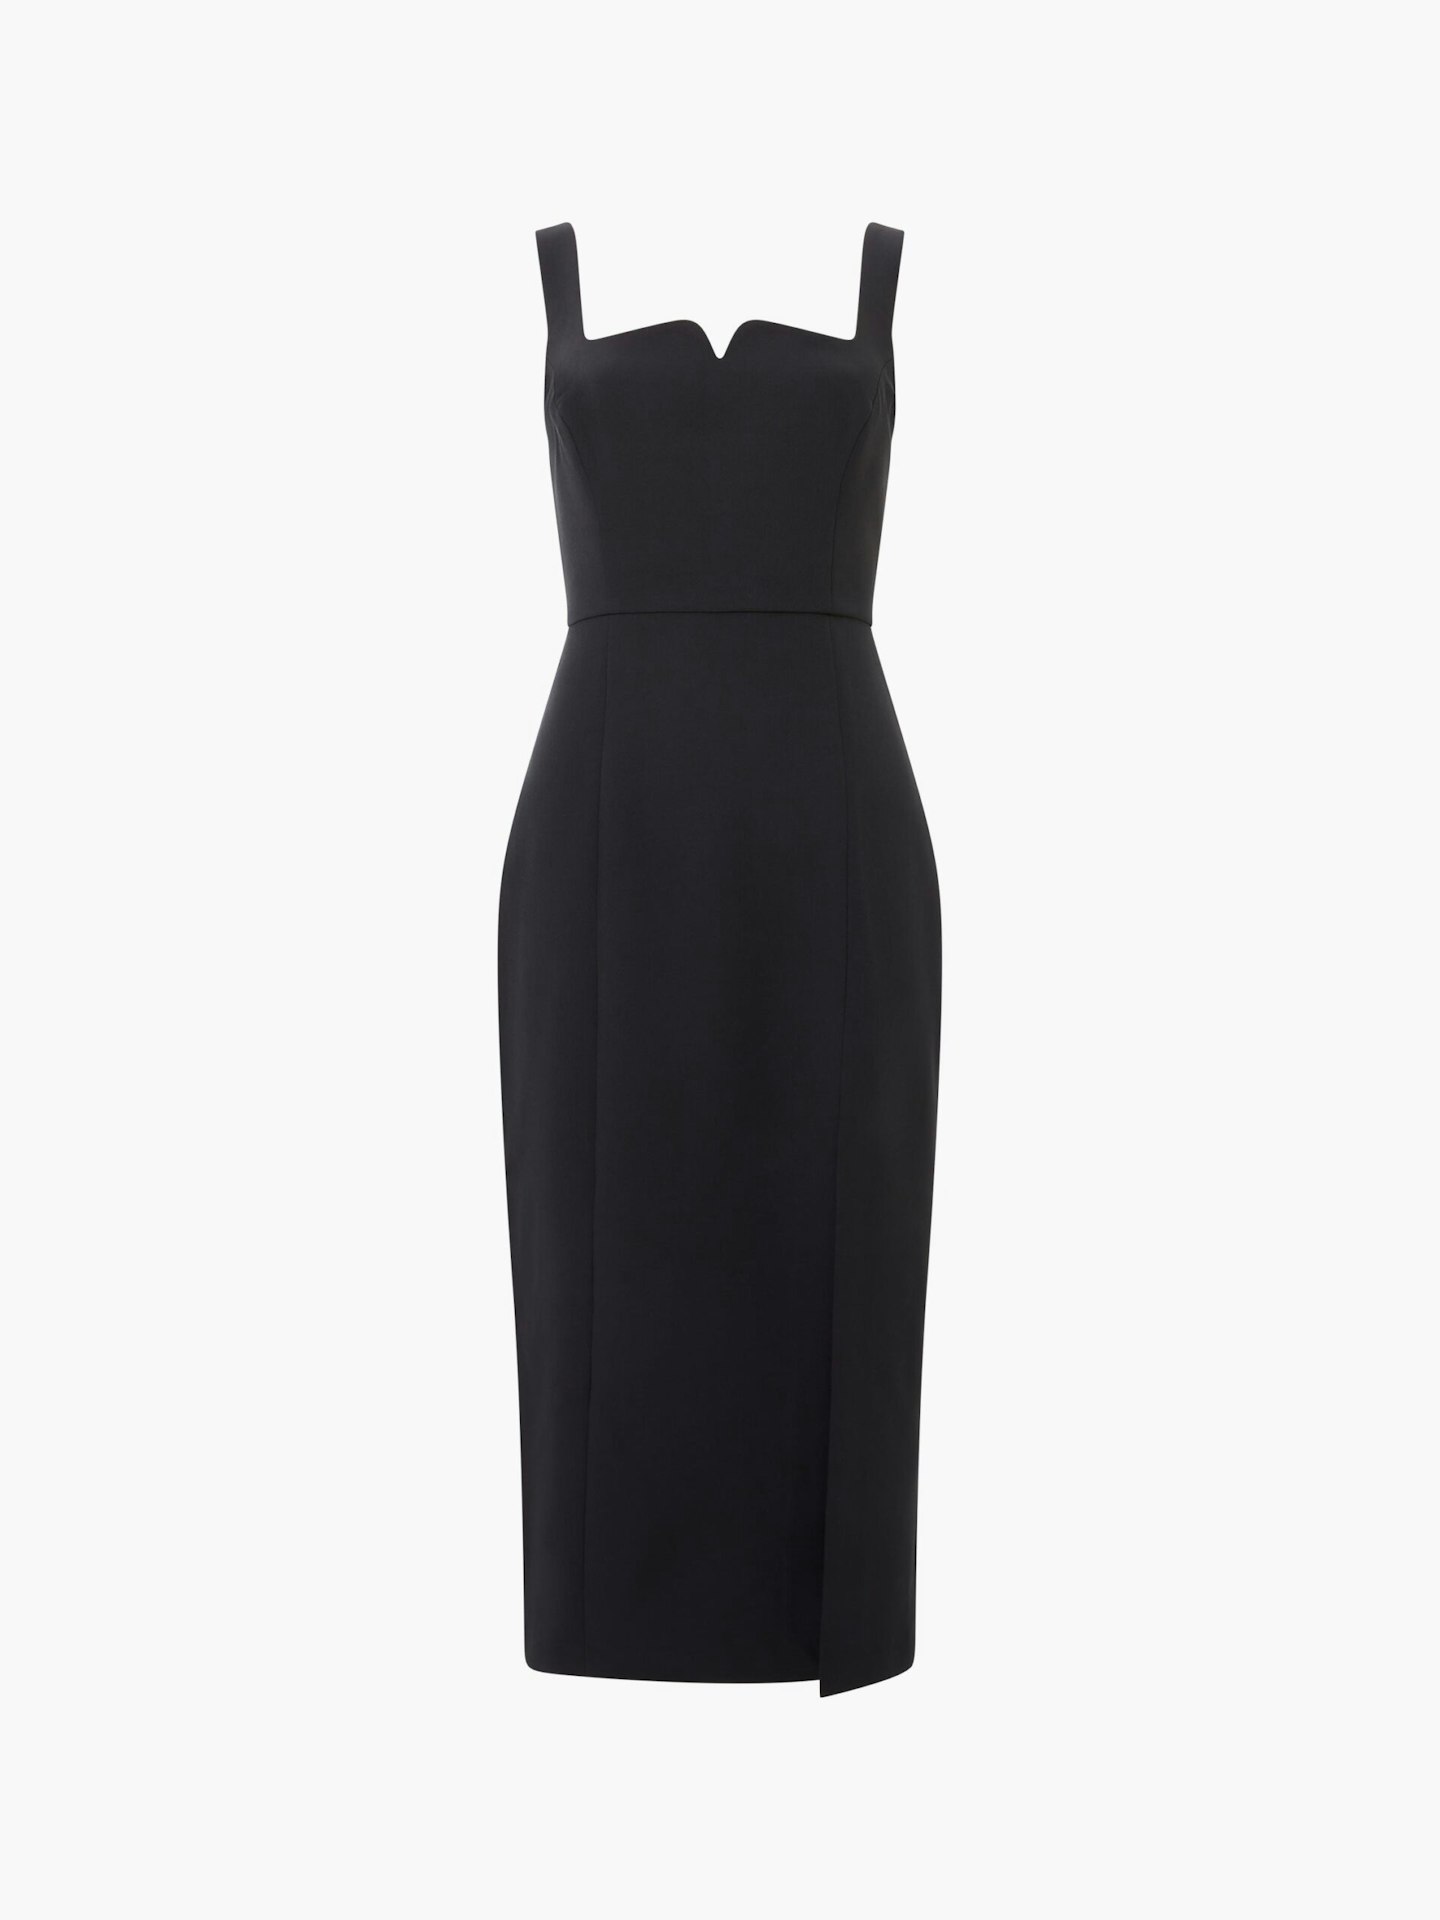 French Connection, Echo Crepe Neck Detail Midi Dress